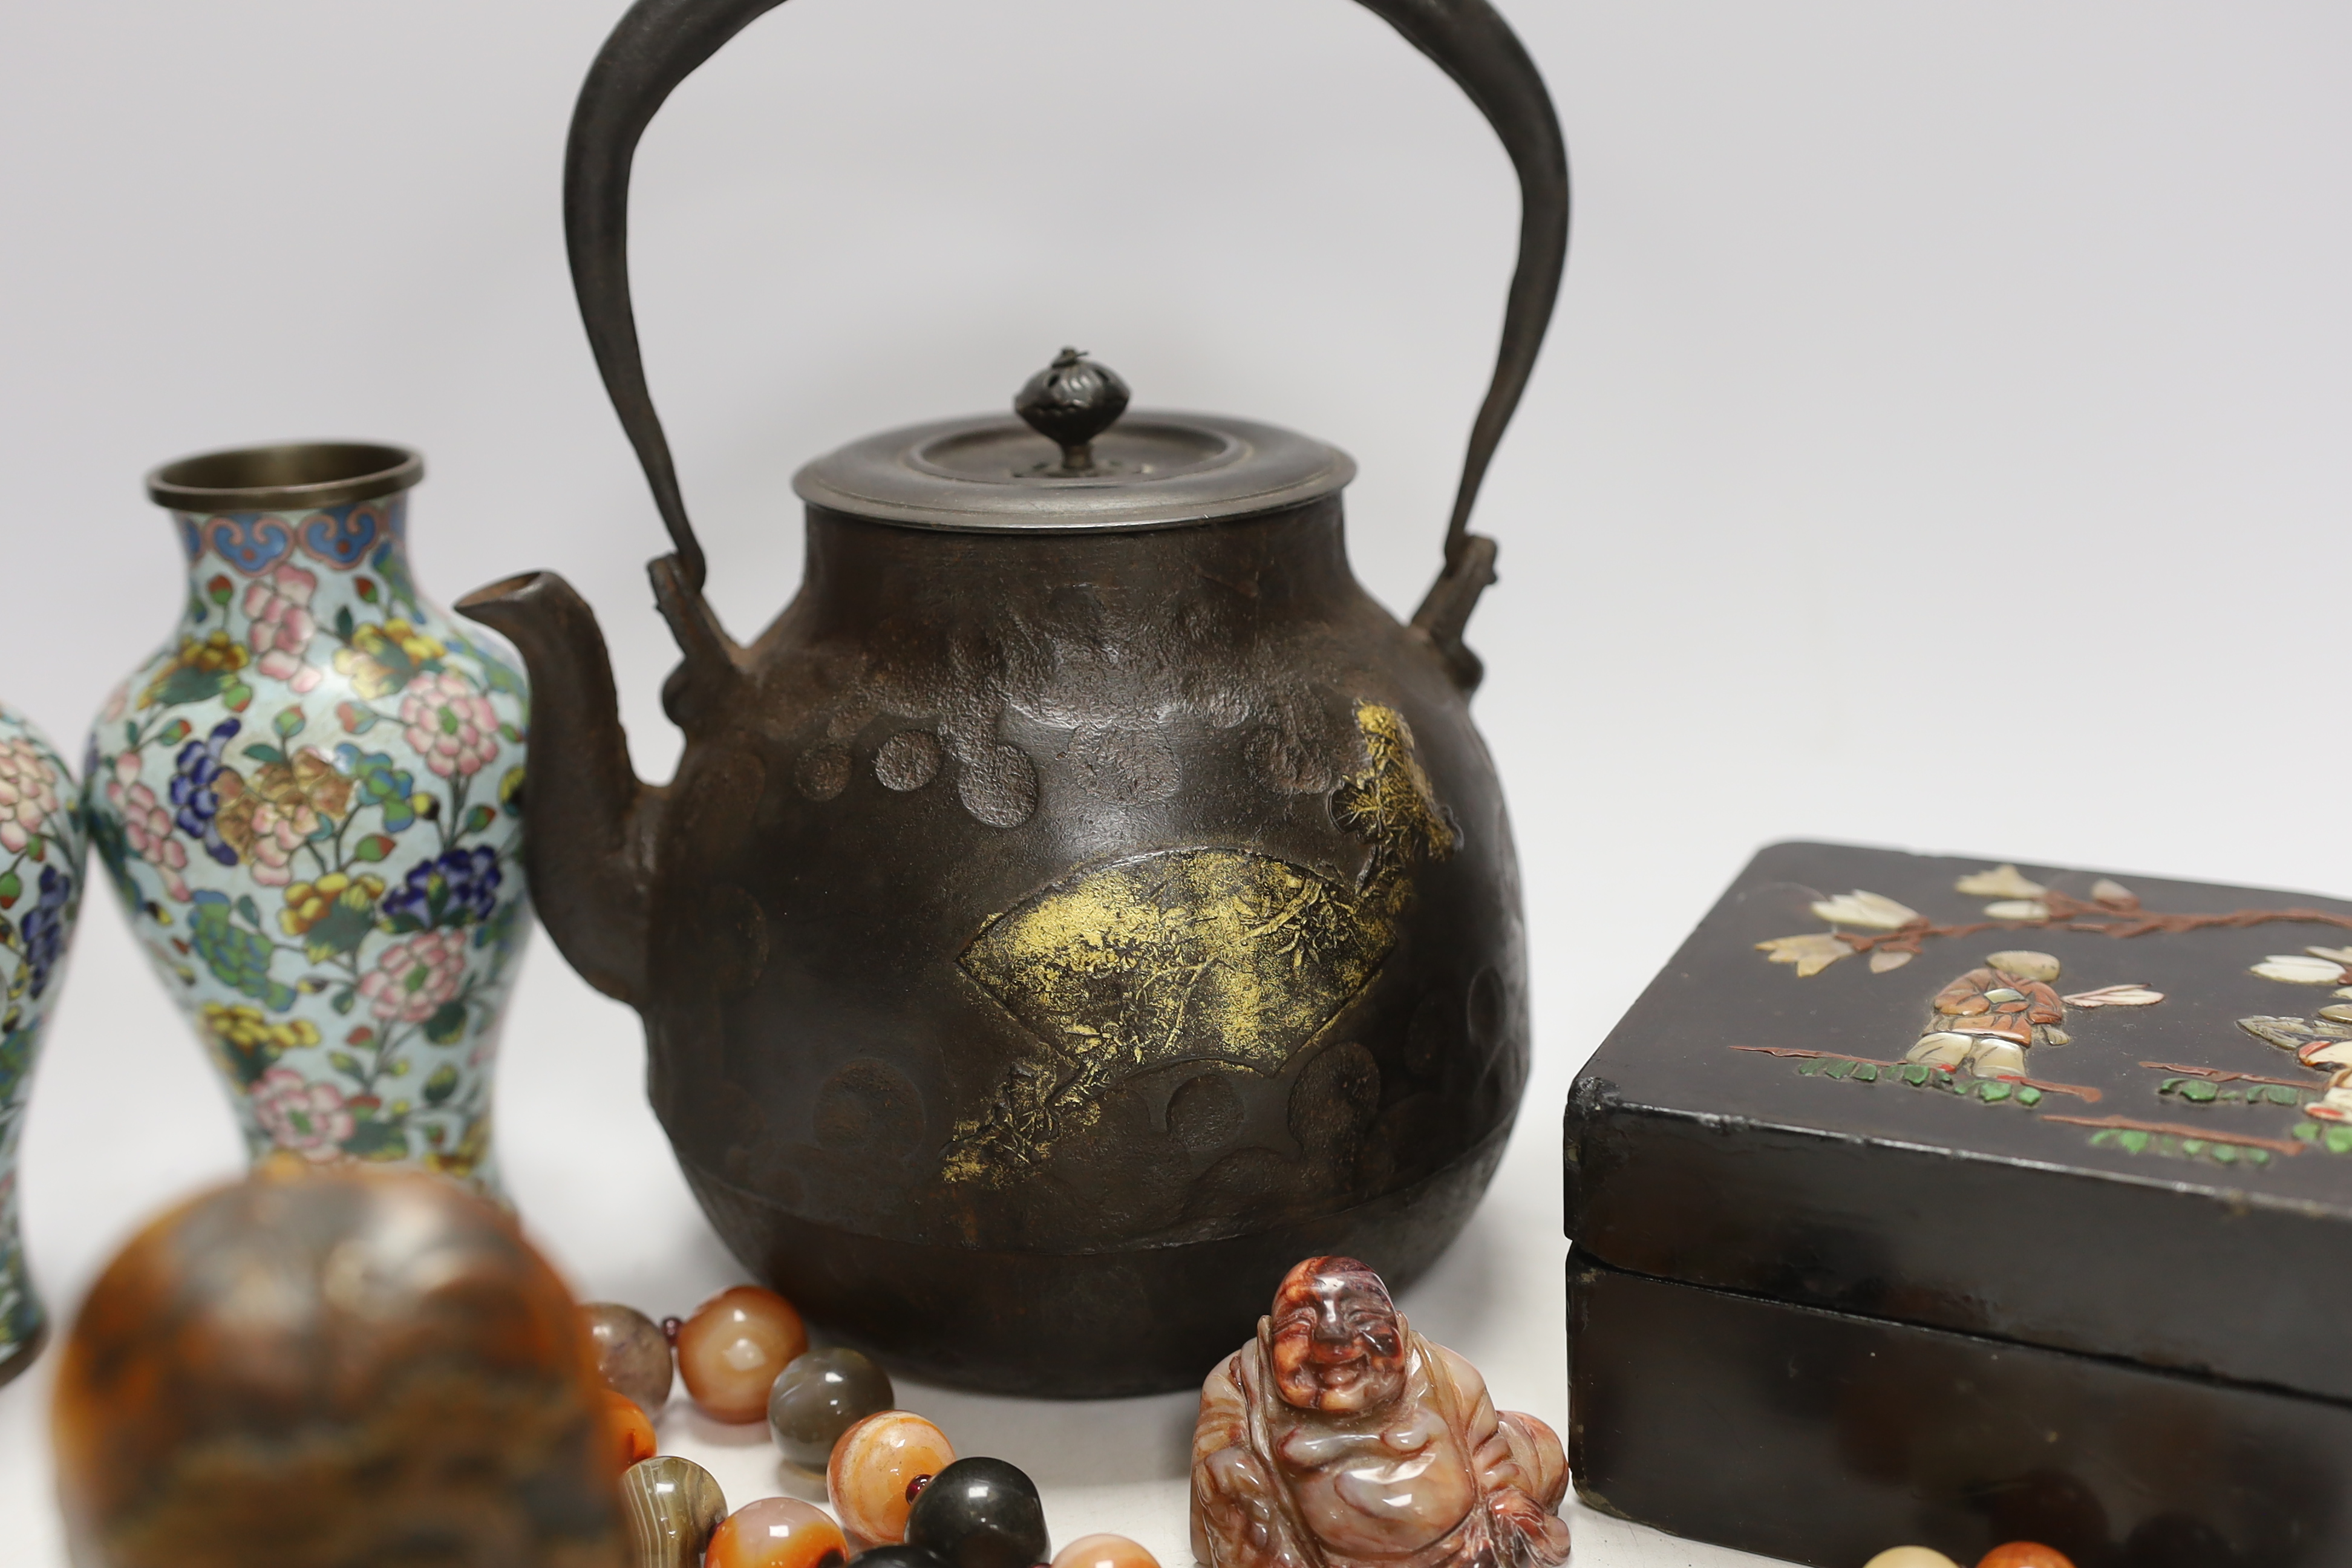 A Japanese iron tetsubin kettle with gilt decoration, a pair of Chinese cloisonné enamel vases, 12.5cm, a lacquered box with mother of pearl inlay, a carved black stone disc, 5cm diameter, a miniature ceramic pot and an